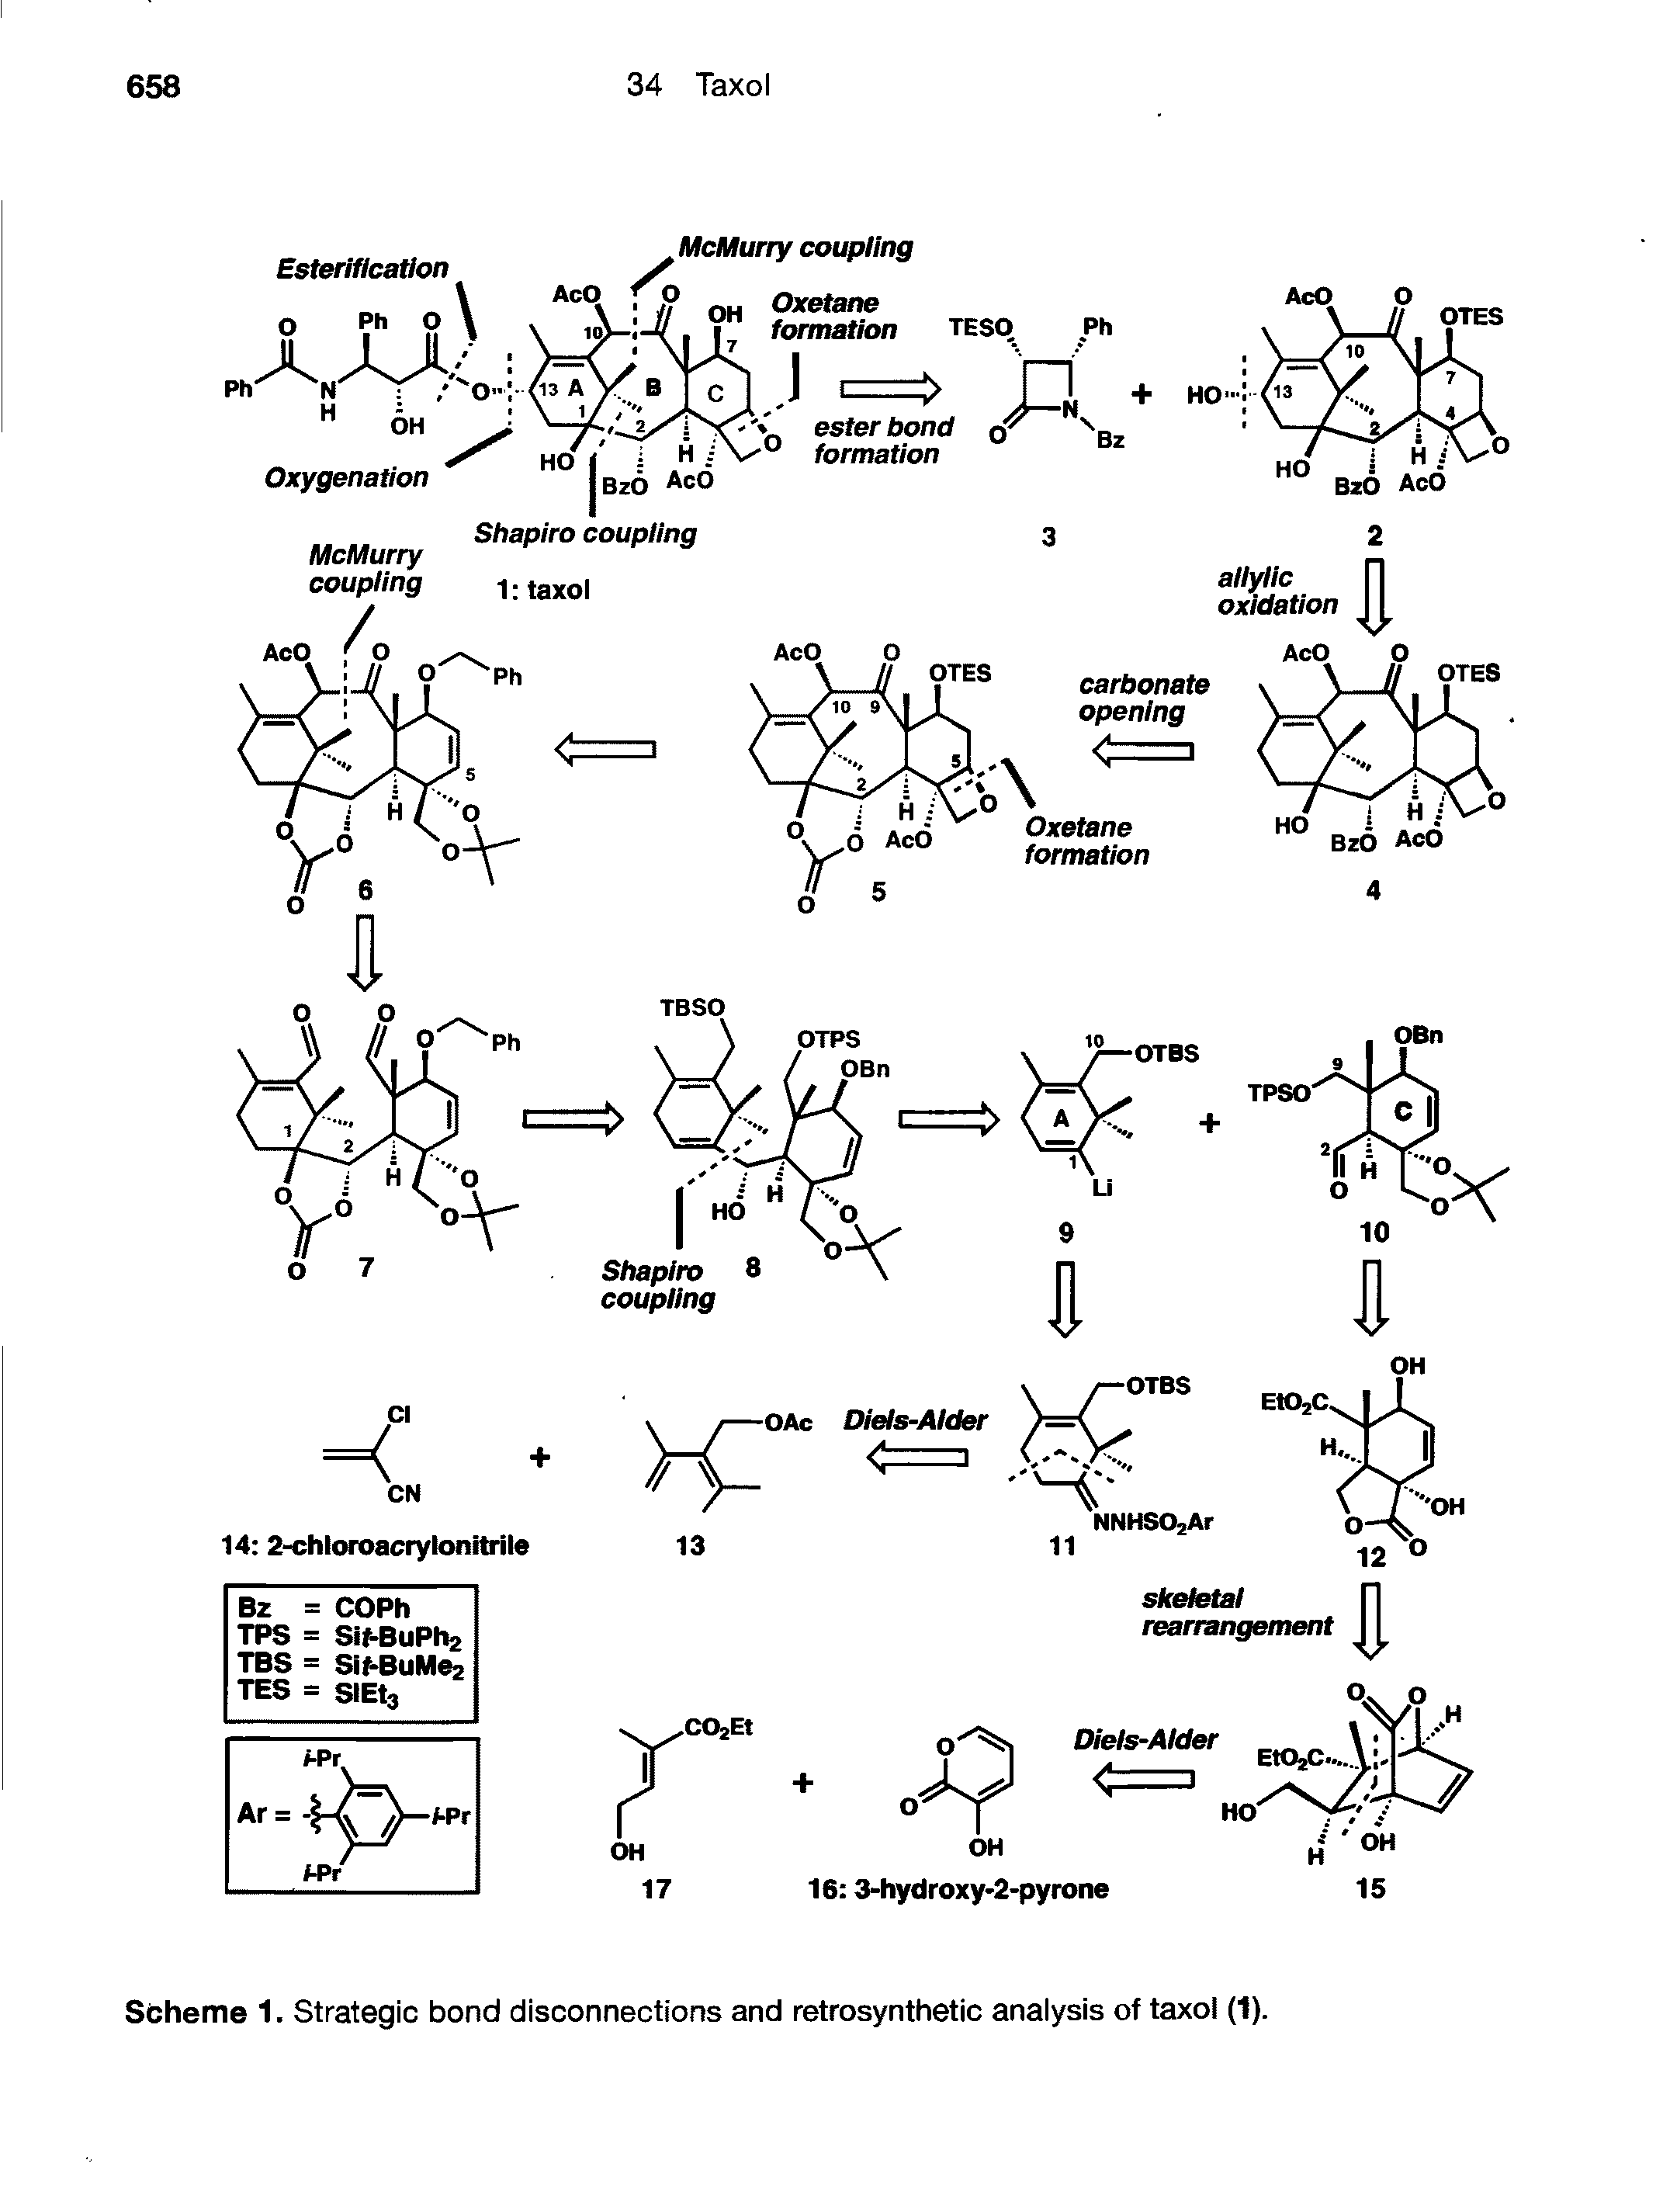 Scheme 1. Strategic bond disconnections and retrosynthetic analysis of taxol (1).